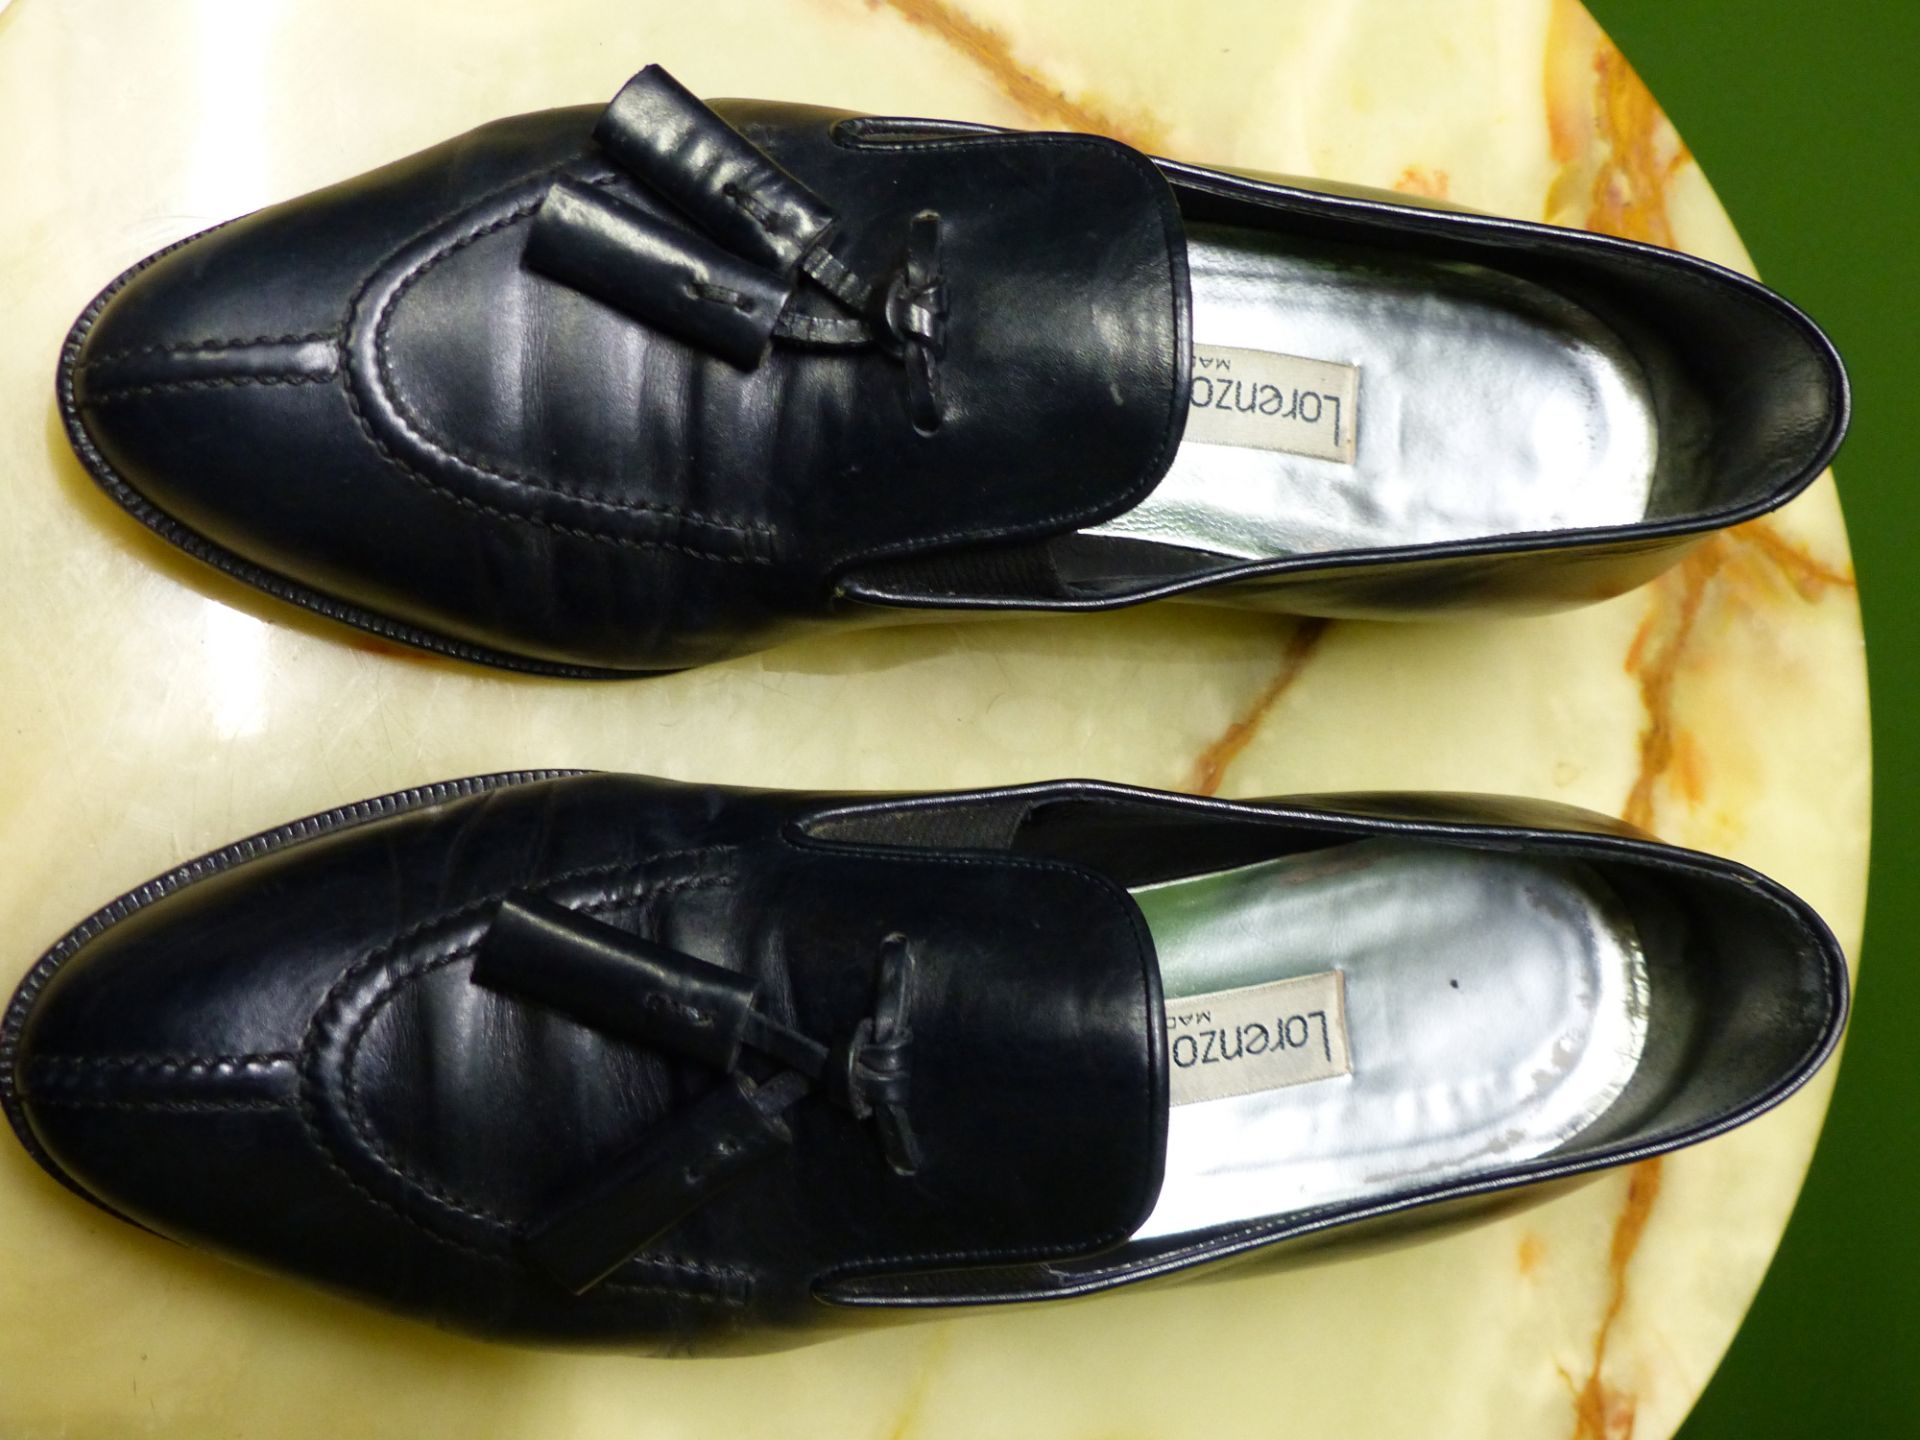 SHOES. LORENZO BANFI ITALY BLACK LEATHER COURT SHOES EUR SIZE 39.5. TOGETHER WITH BROWN BOOTS SIZE - Image 4 of 10